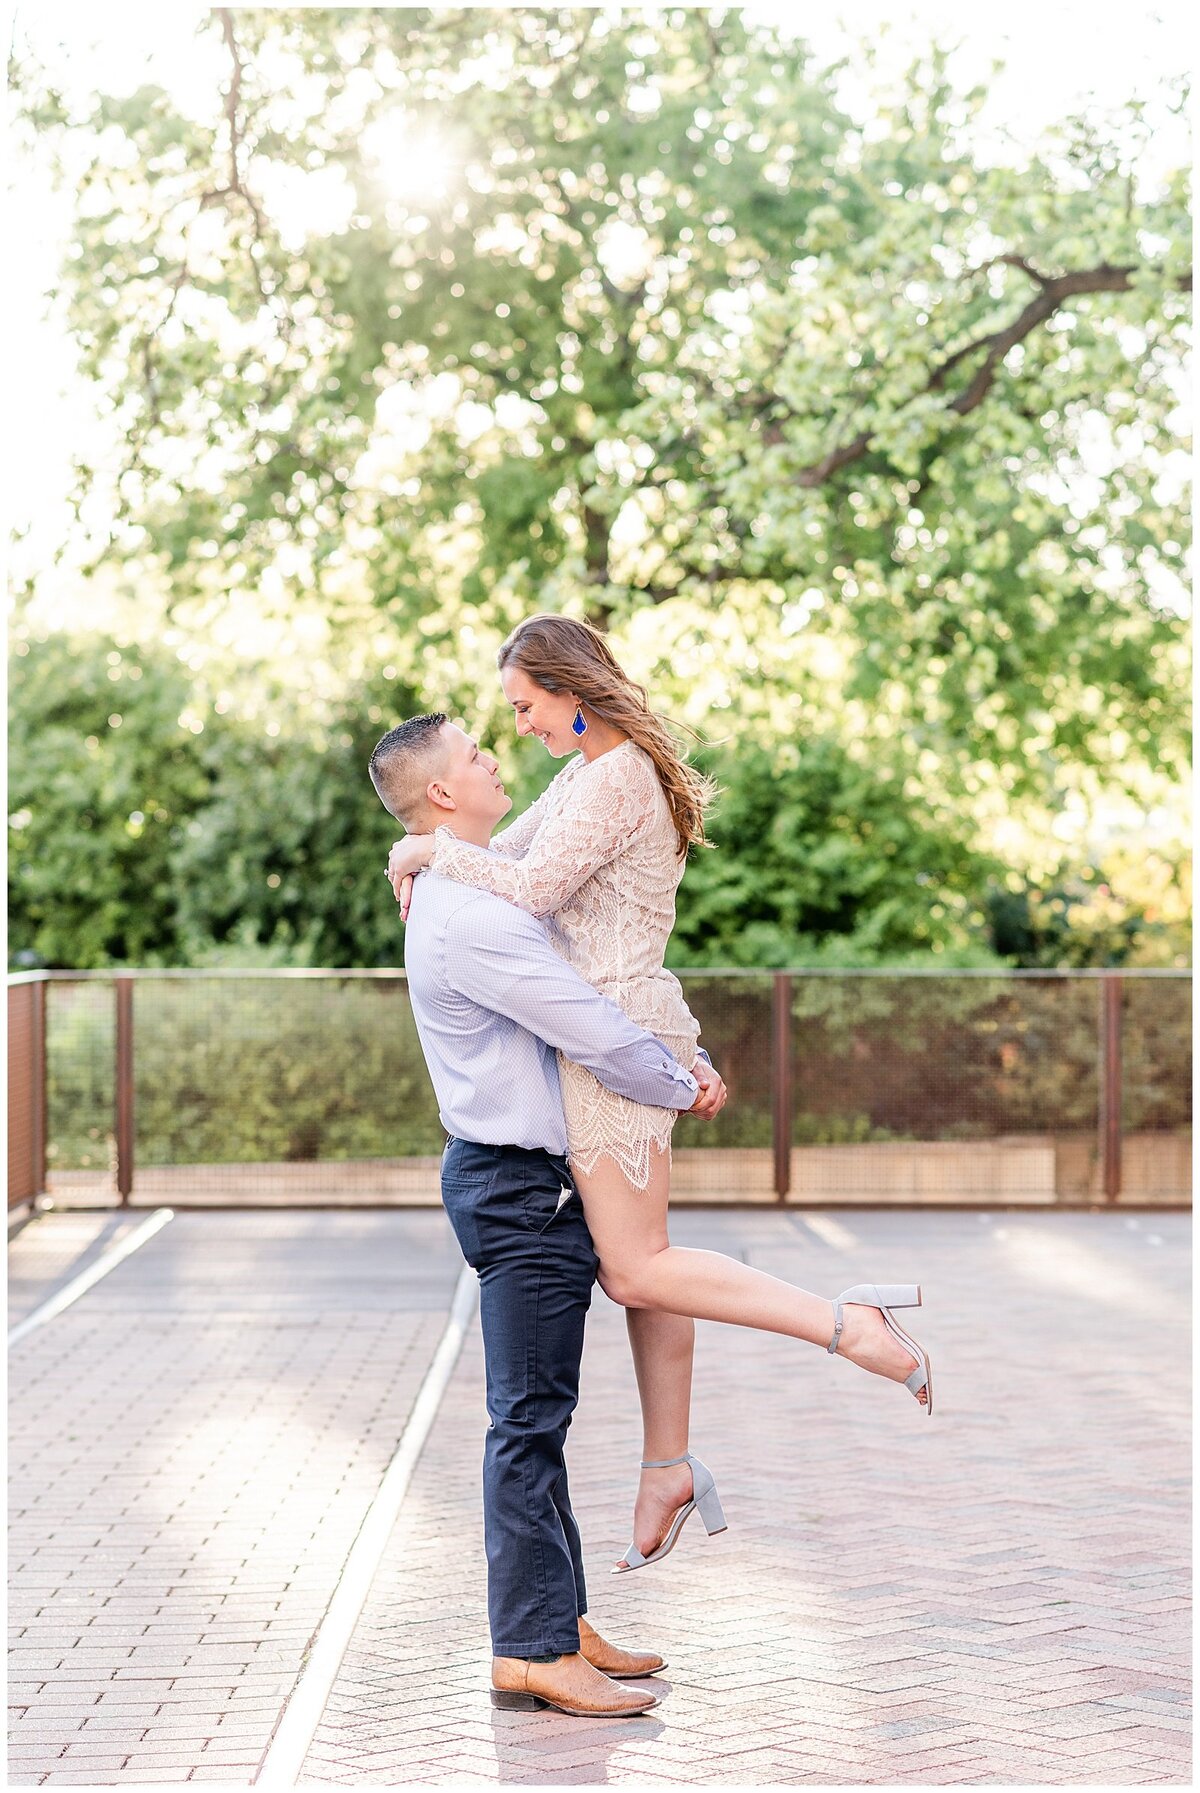 Engagement Session at The Pearl | Heather & Cody 31